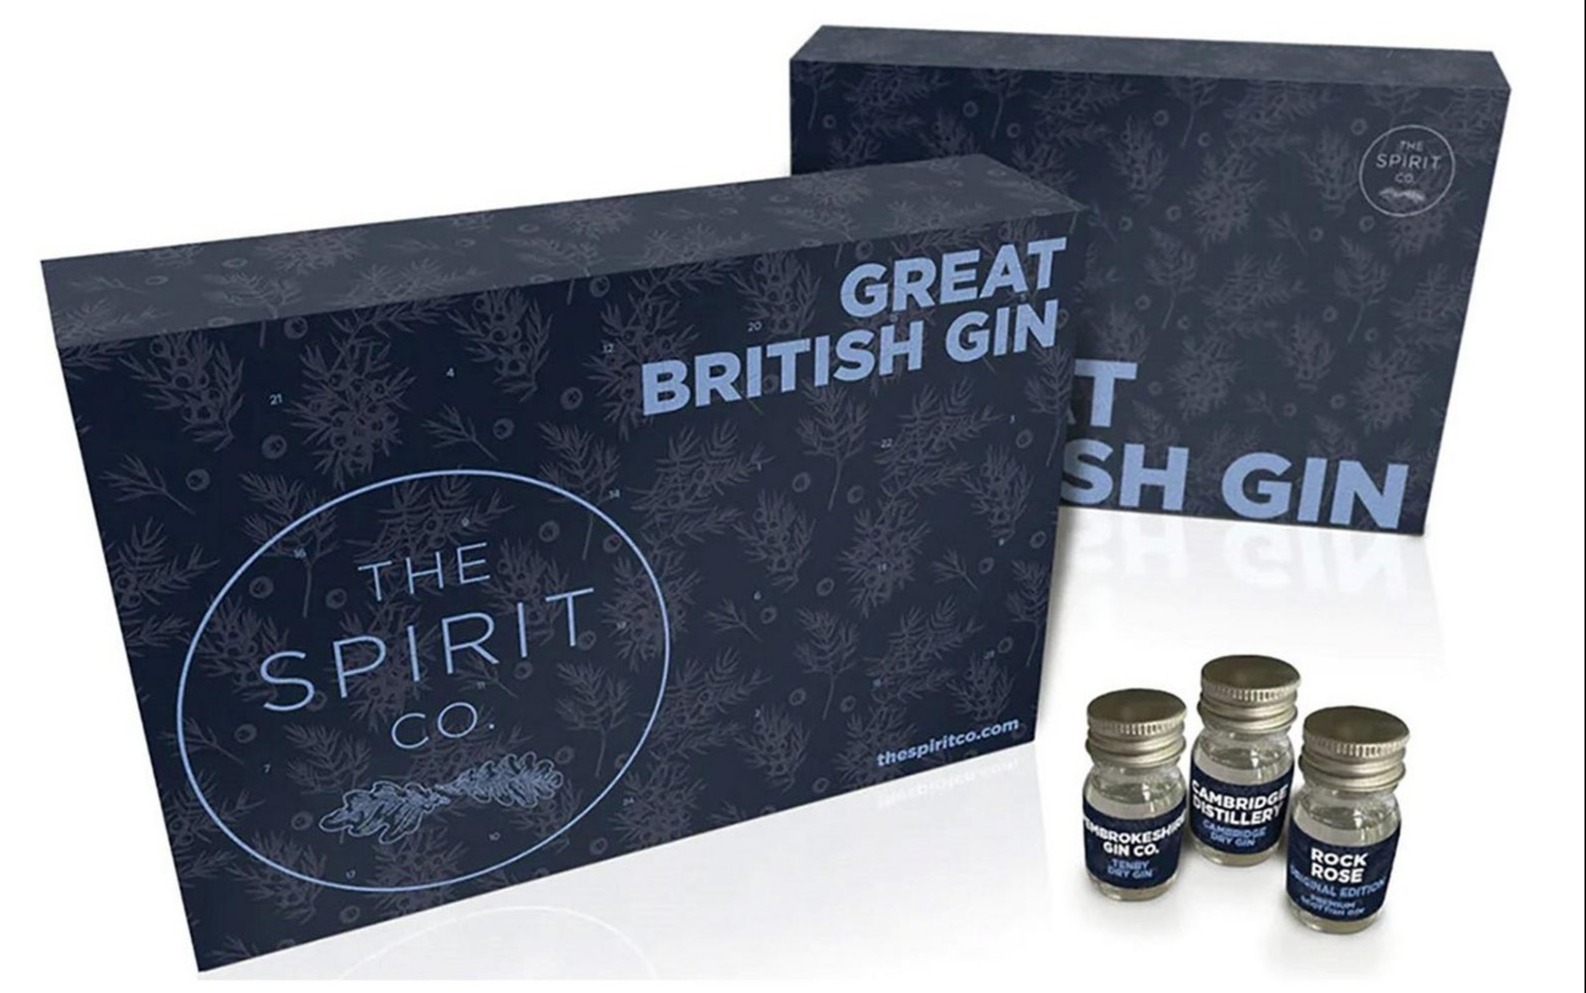 Spicers Of Hythe Spirit & Co Great British Gin Advent Calendar Content (EN)